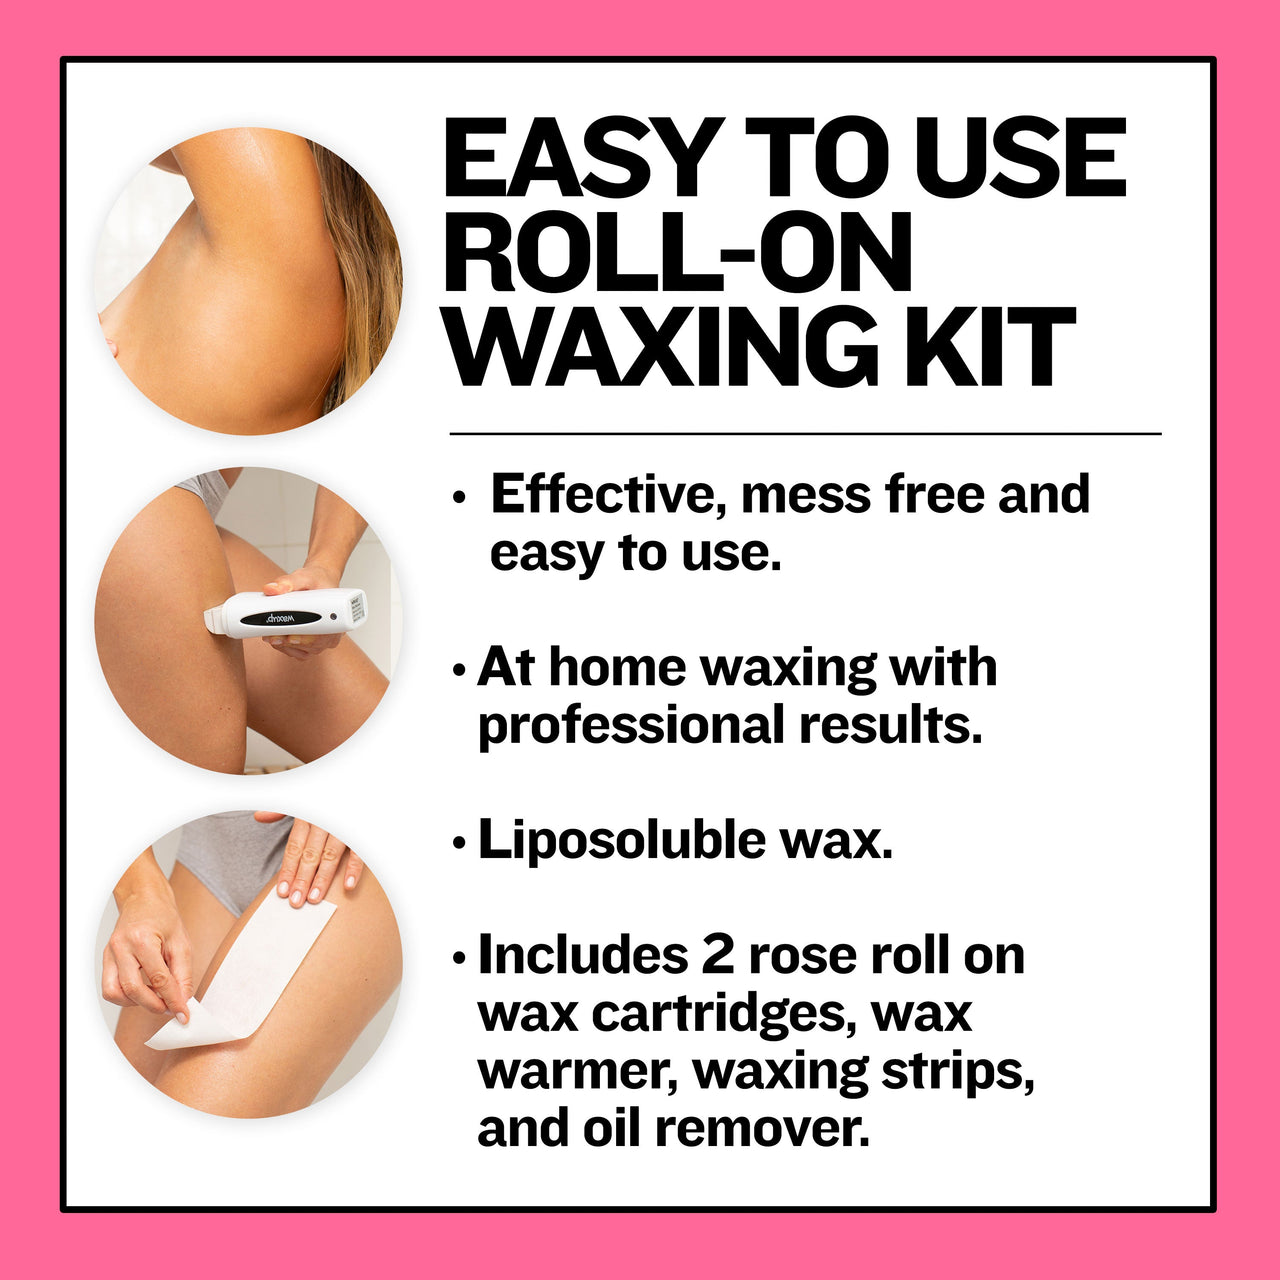 Rose Roller Waxing Kit Buy With Prime - thatswaxup -  - Roller Waxing Kit - waxup hair removal wax body waxing kit women and men professional waxing supplies